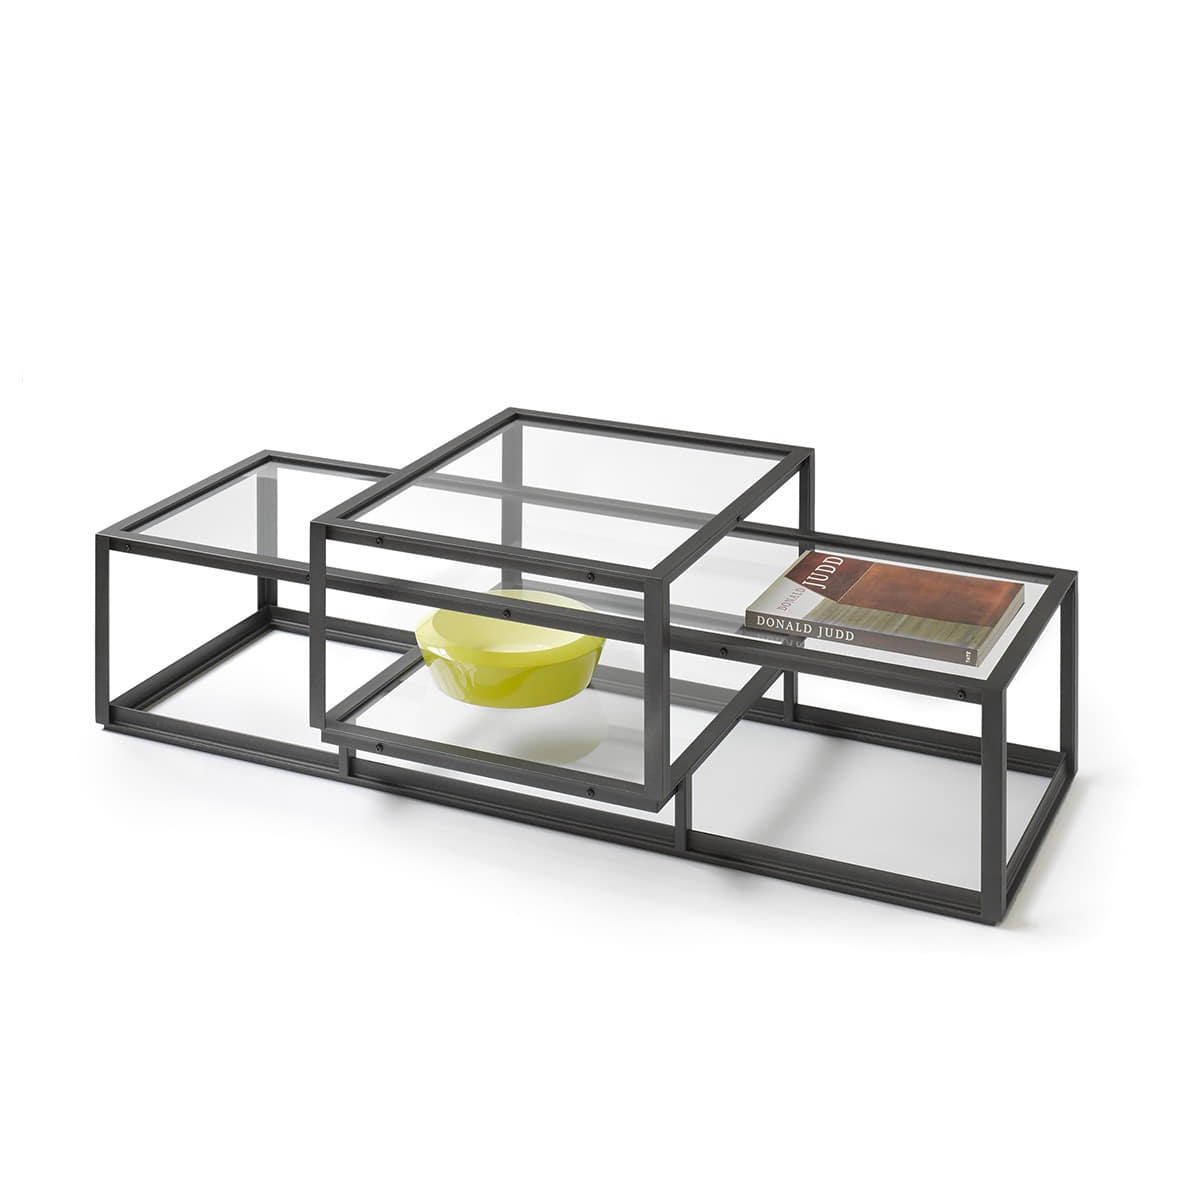 Spectrum Tangled Coffee Table - Black/Clear Glass 2size